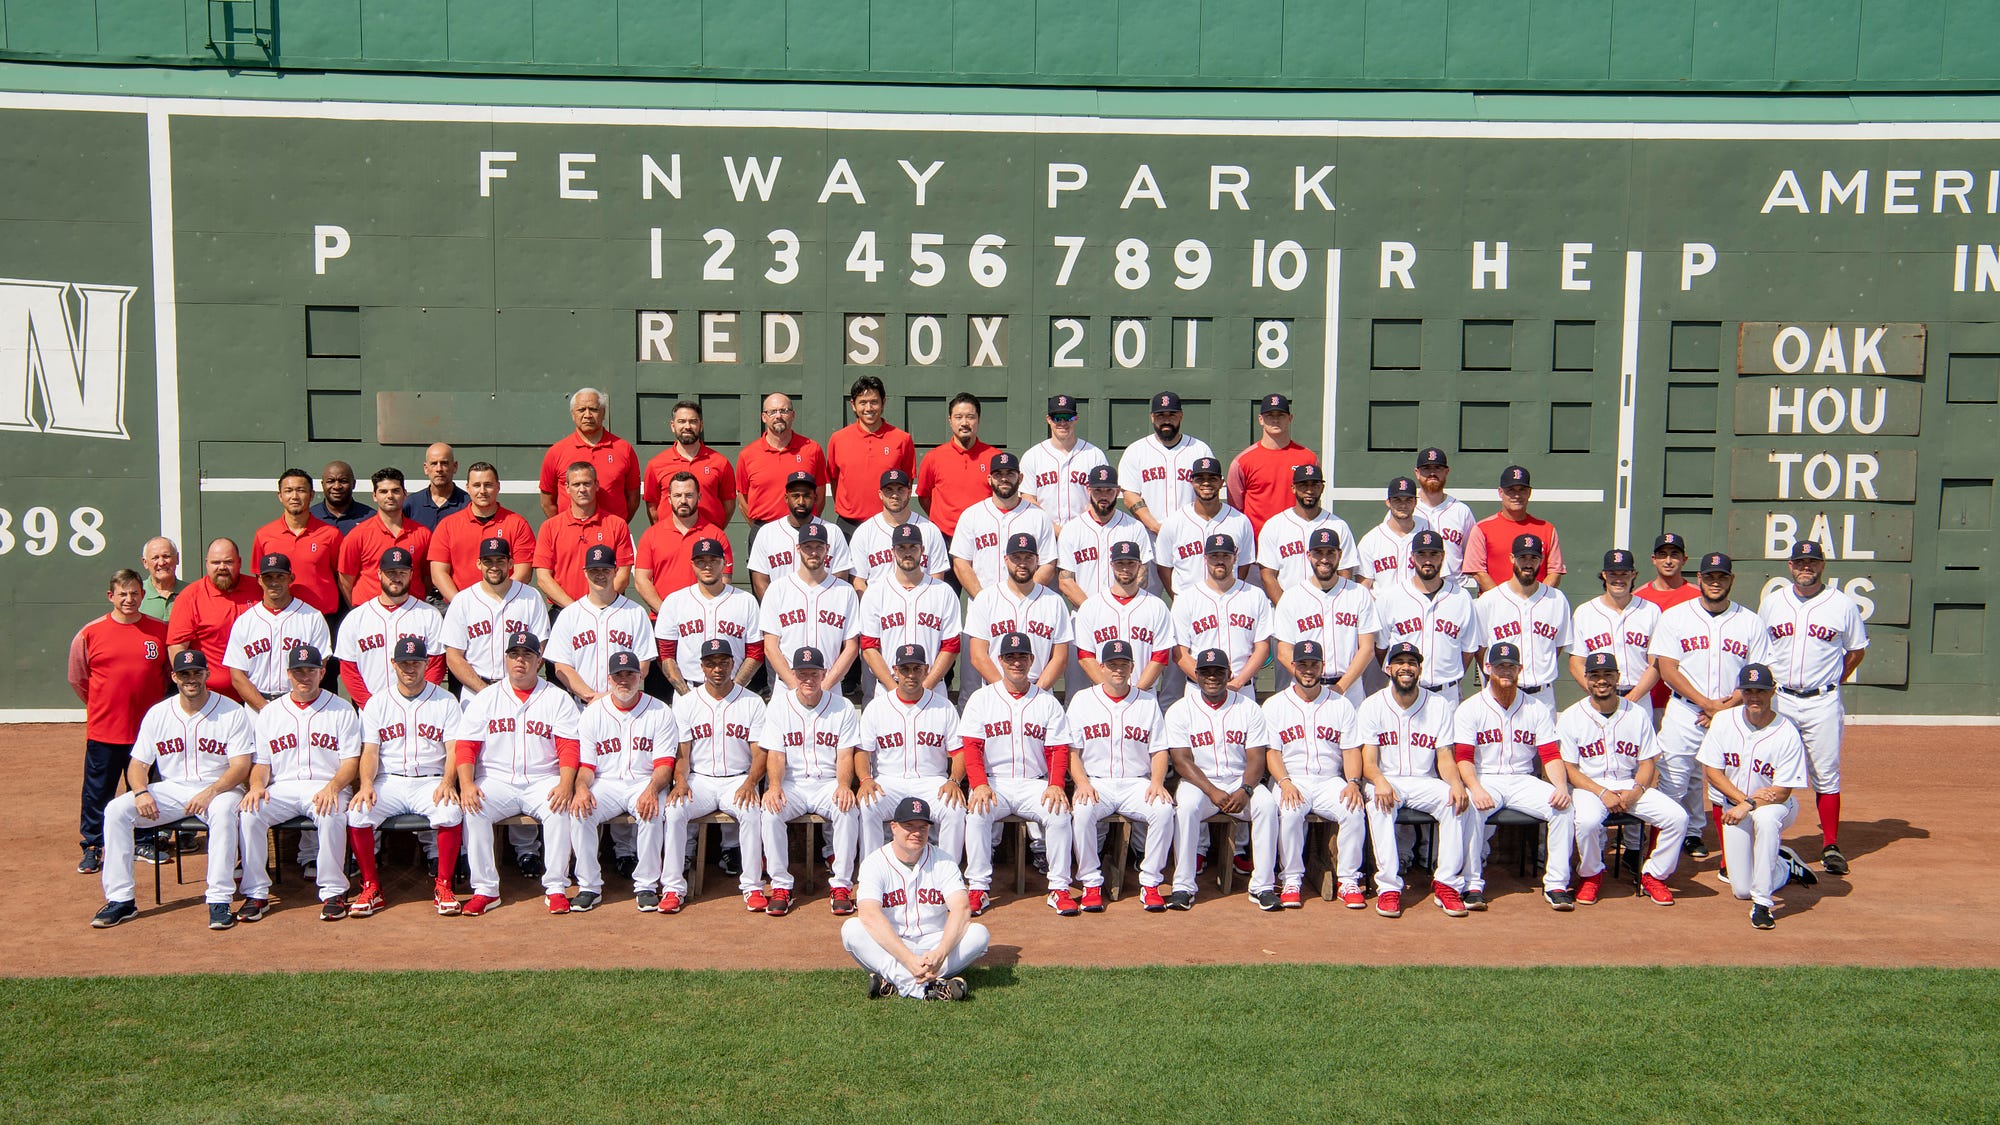 Red Sox Celebrate Puerto Rican Heritage Night at Fenway Park